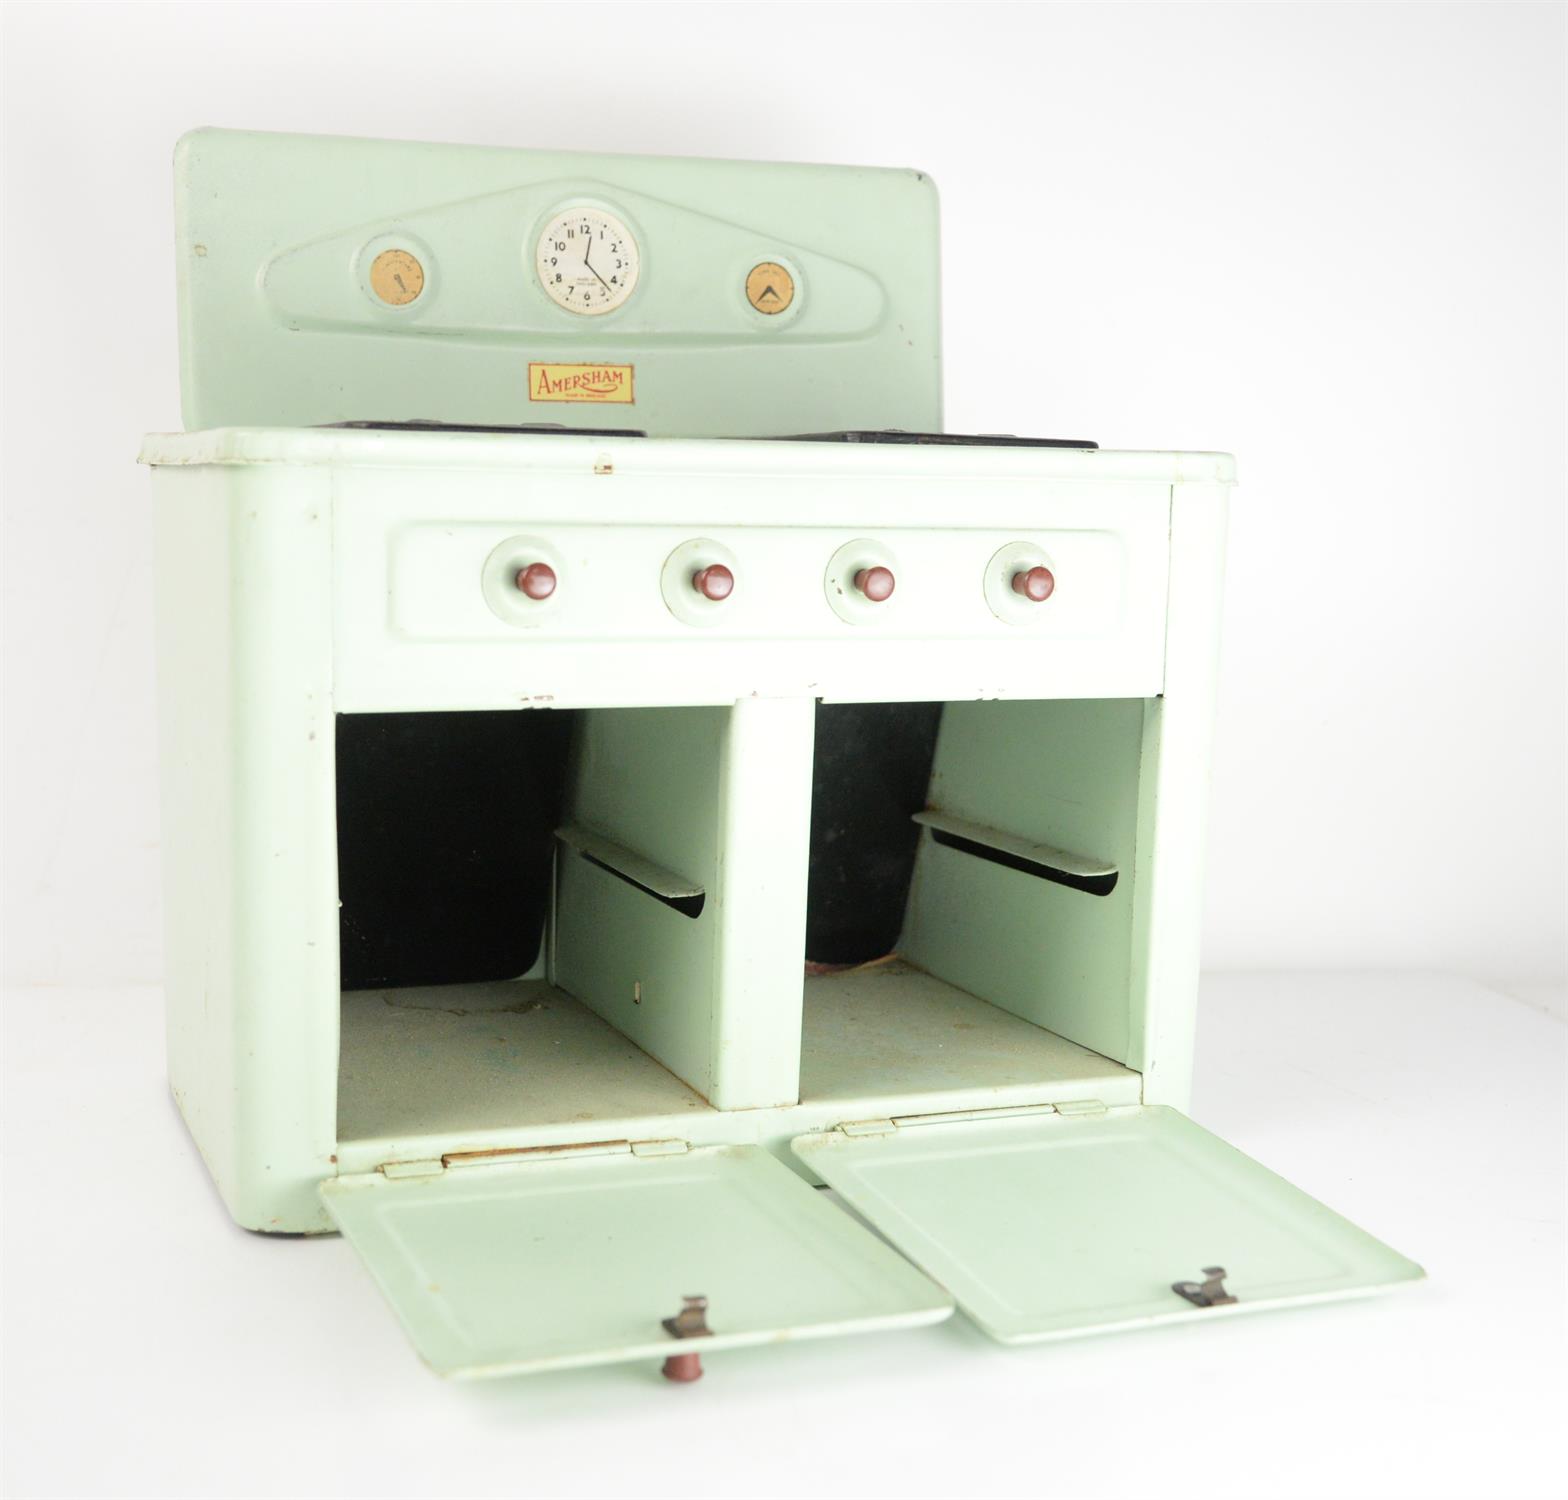 Childs tin plate Amersham range cooker with twin hobs and two ovens, h32.5 x w31.5 x d19cm, - Image 2 of 5